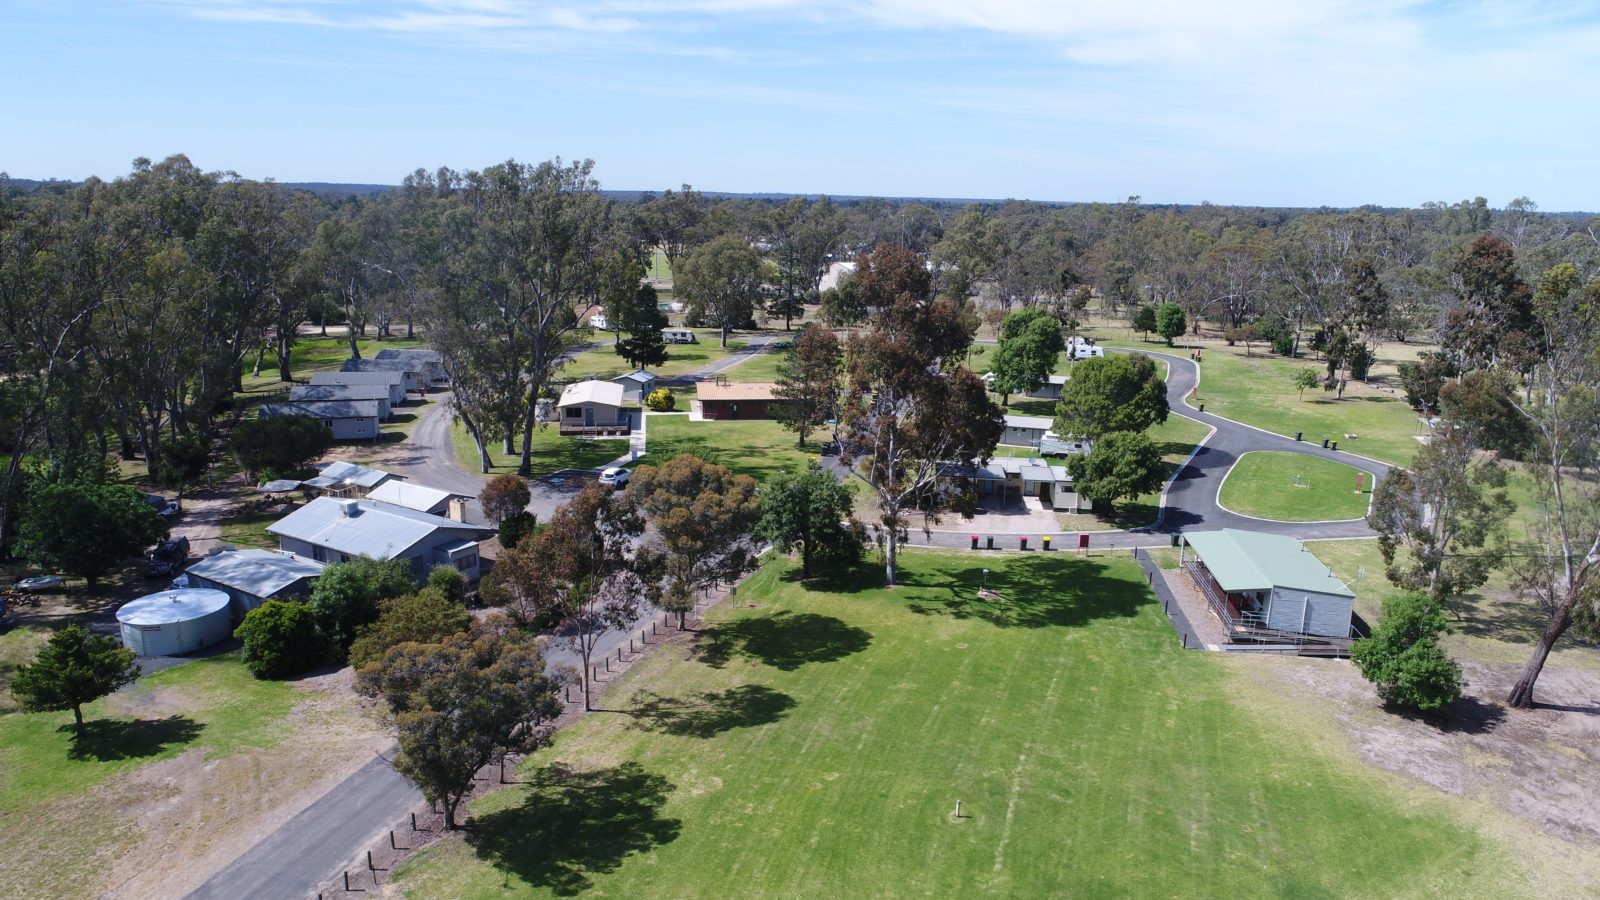 Overhead image of caravan park showing lawn areas, cabins, buildings, bushland and river at back